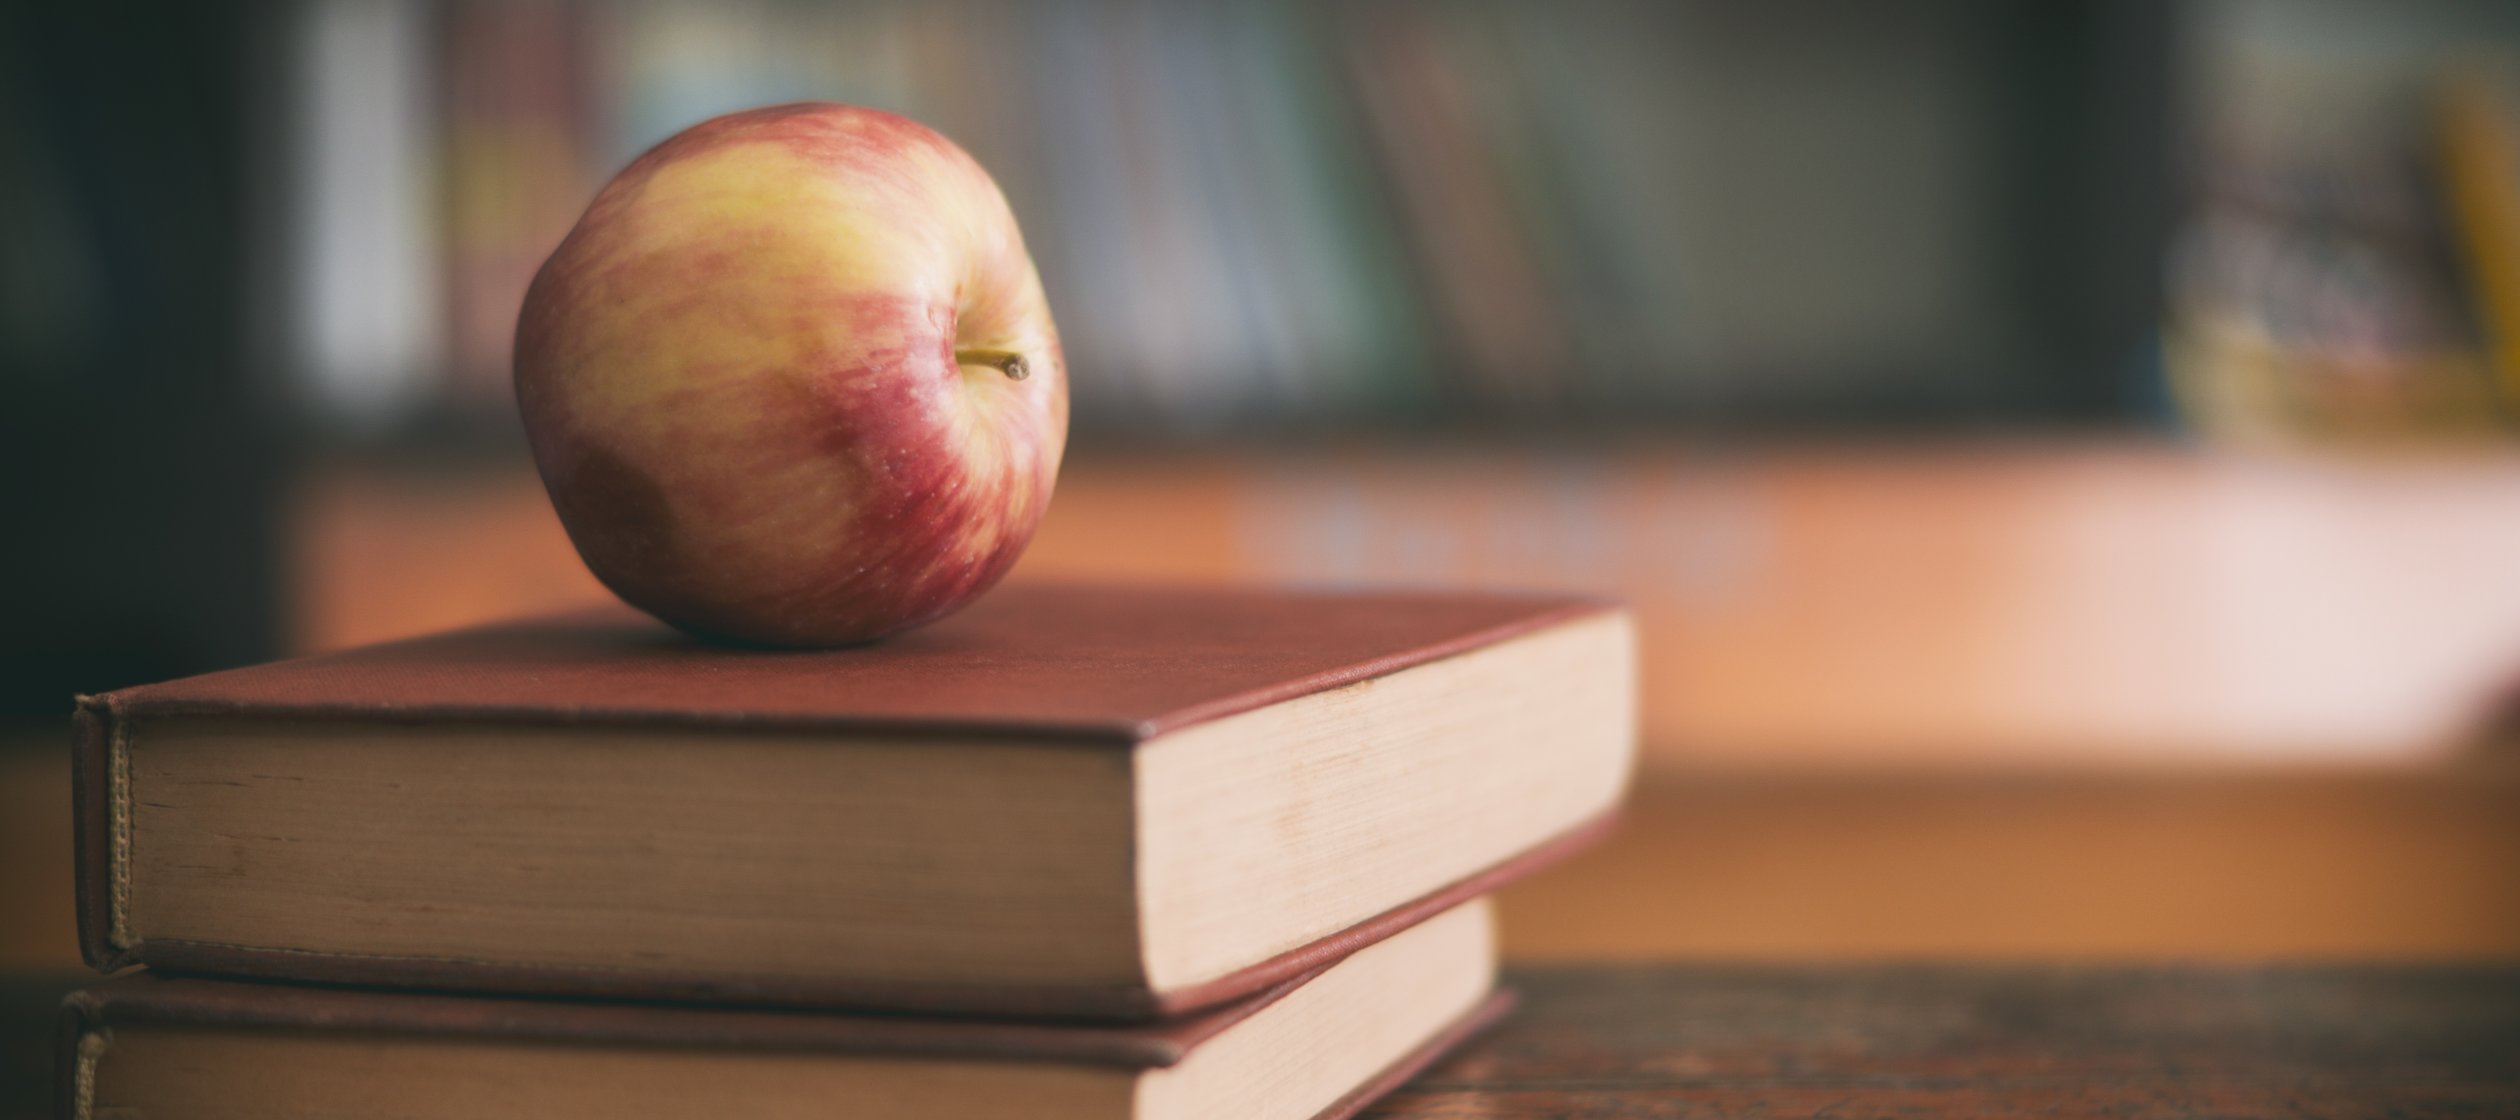 Apple sitting on a pile of books on a classroom desk.